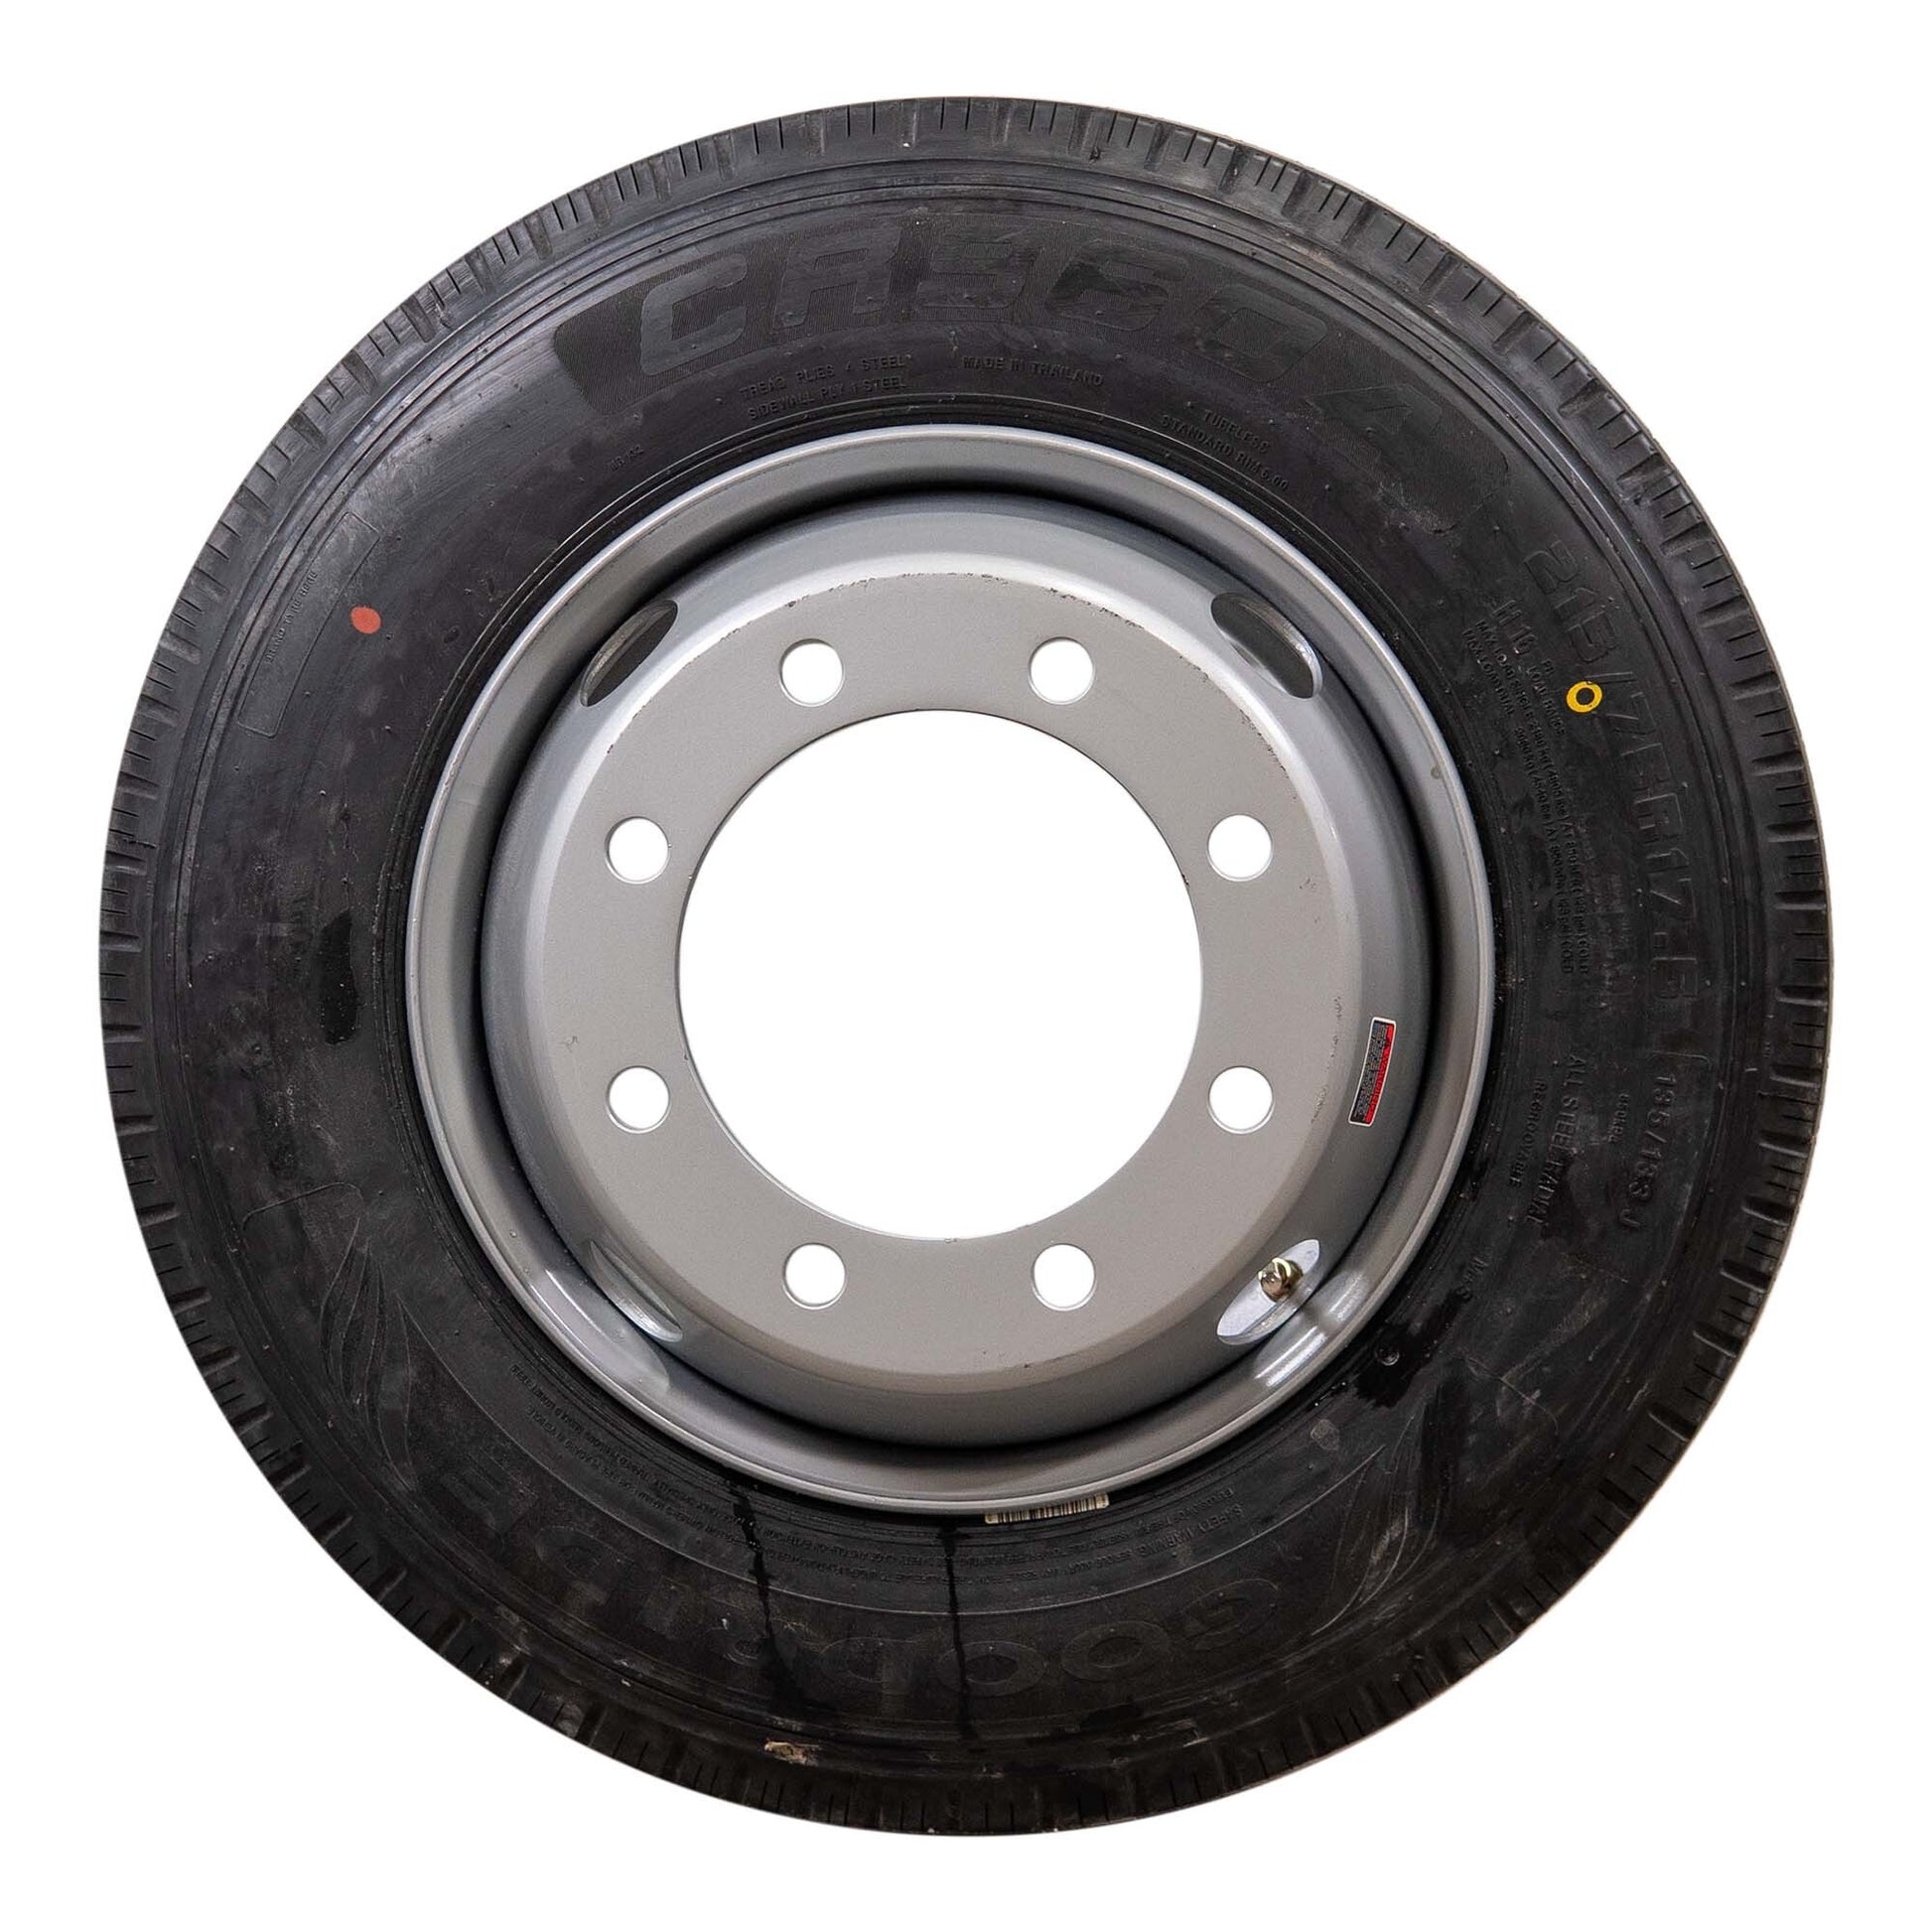 Goodride 17.5" 16 ply Radial Trailer Tire & Wheel - ST 215/75R17.5 8x275mm Lug (Silver Dual) - The Trailer Parts Outlet